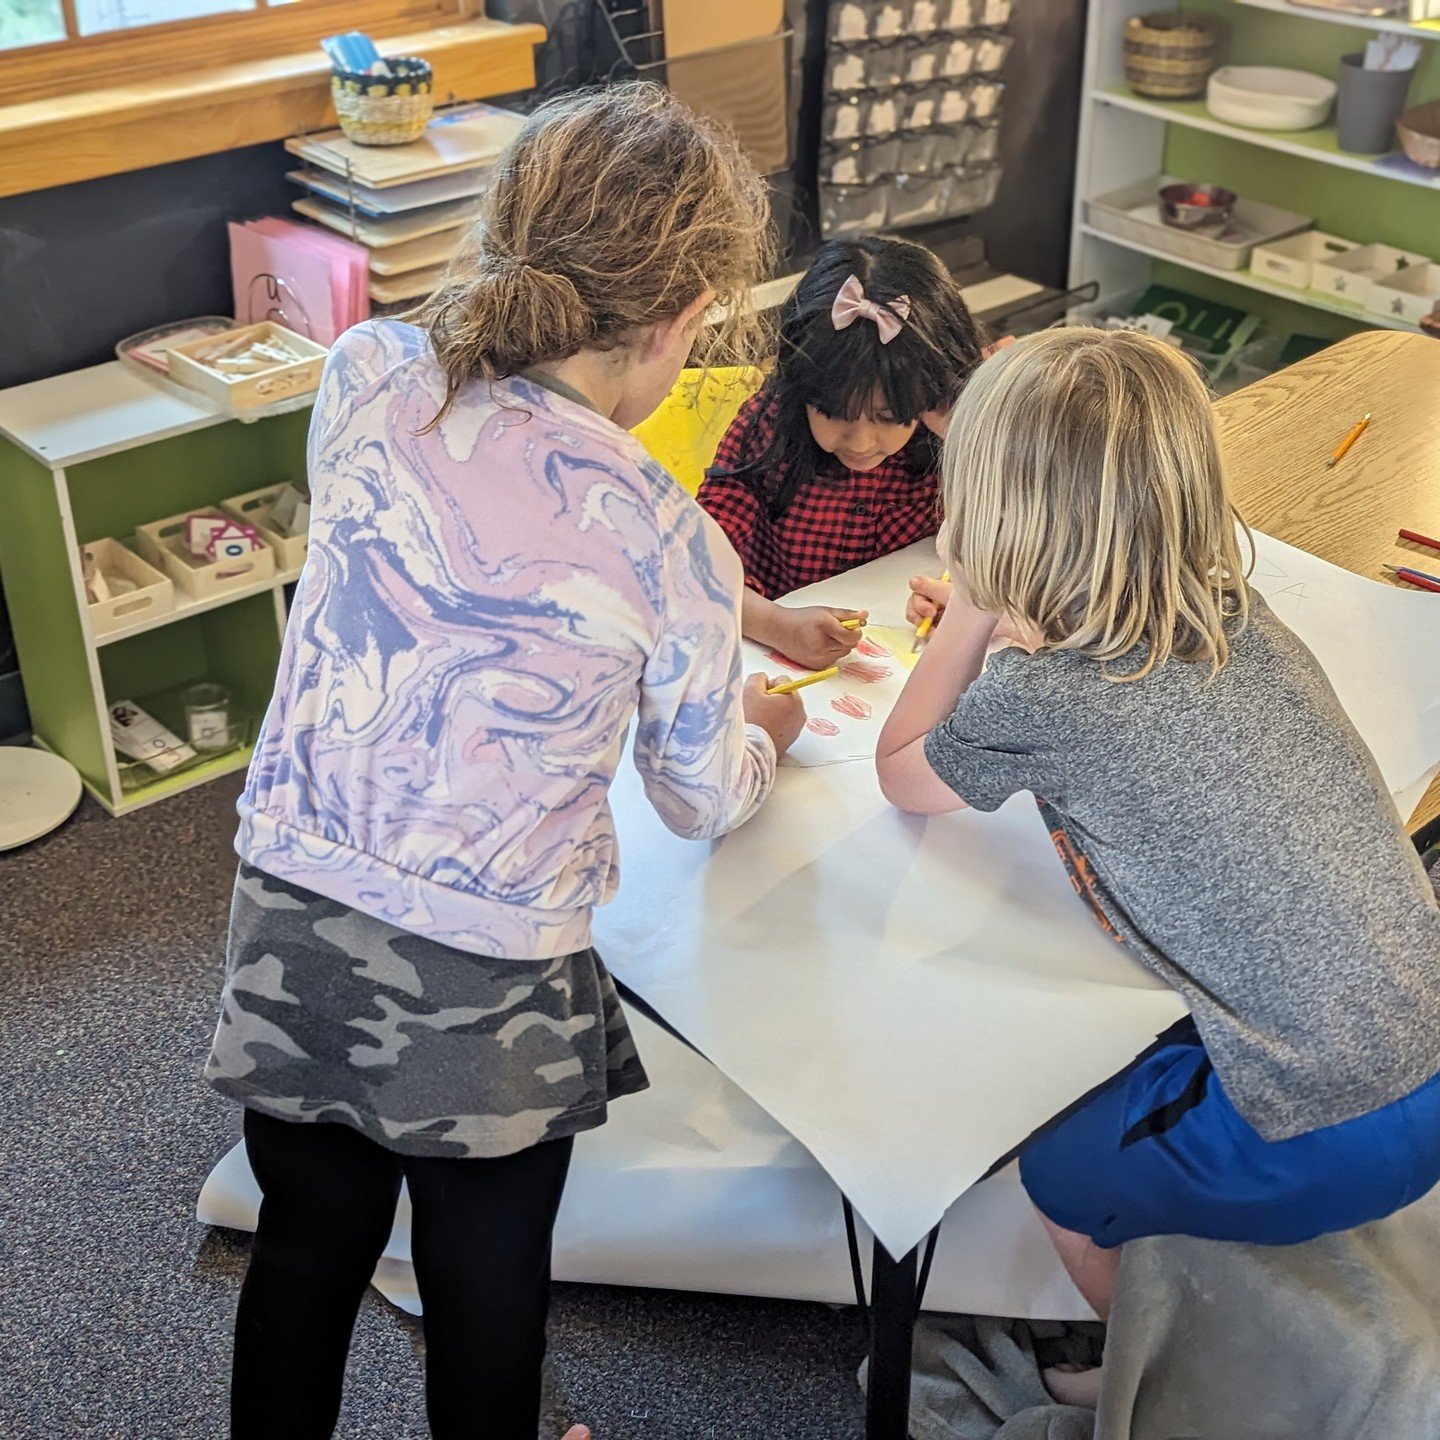 Are 5 and 6-year olds capable of collaborating together to learn entrepreneurship? Yes, yes they are! 

🚀 At Acton Academy Columbus, these young minds are proving that age is just a number when it comes to innovation and business savvy. From dreamin